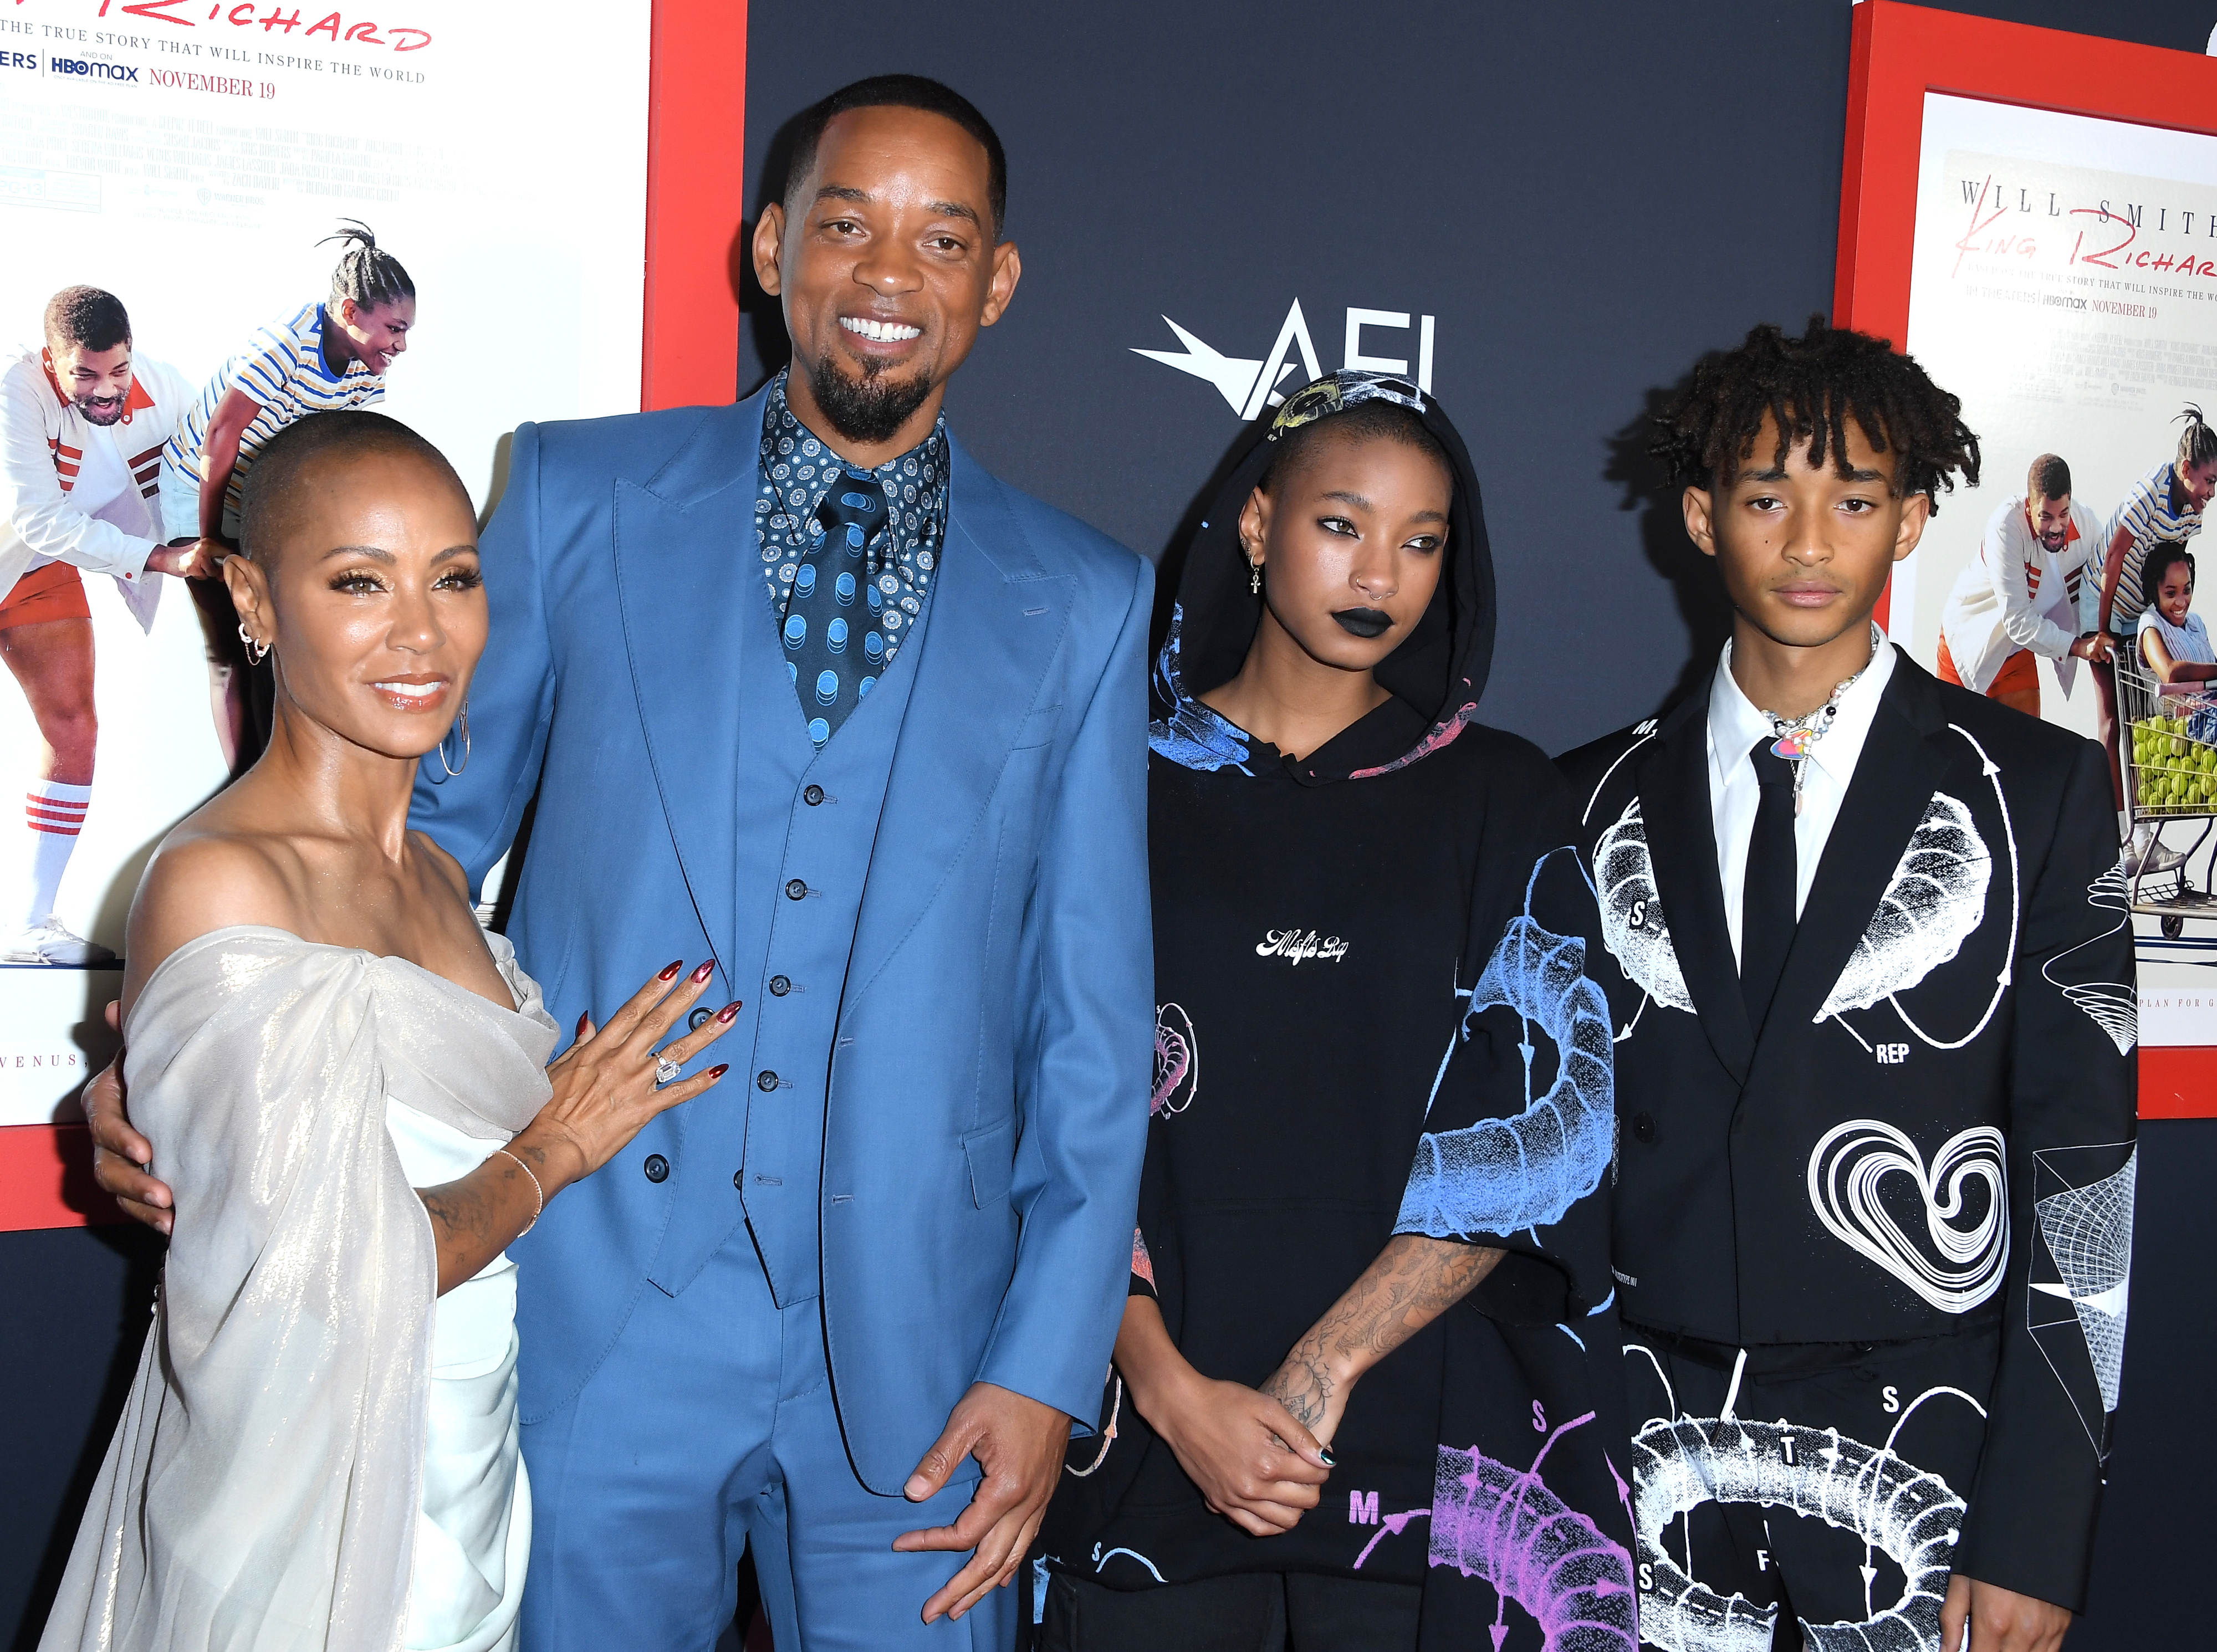 Will, Jada, Willow, and Jaden at a film premiere event